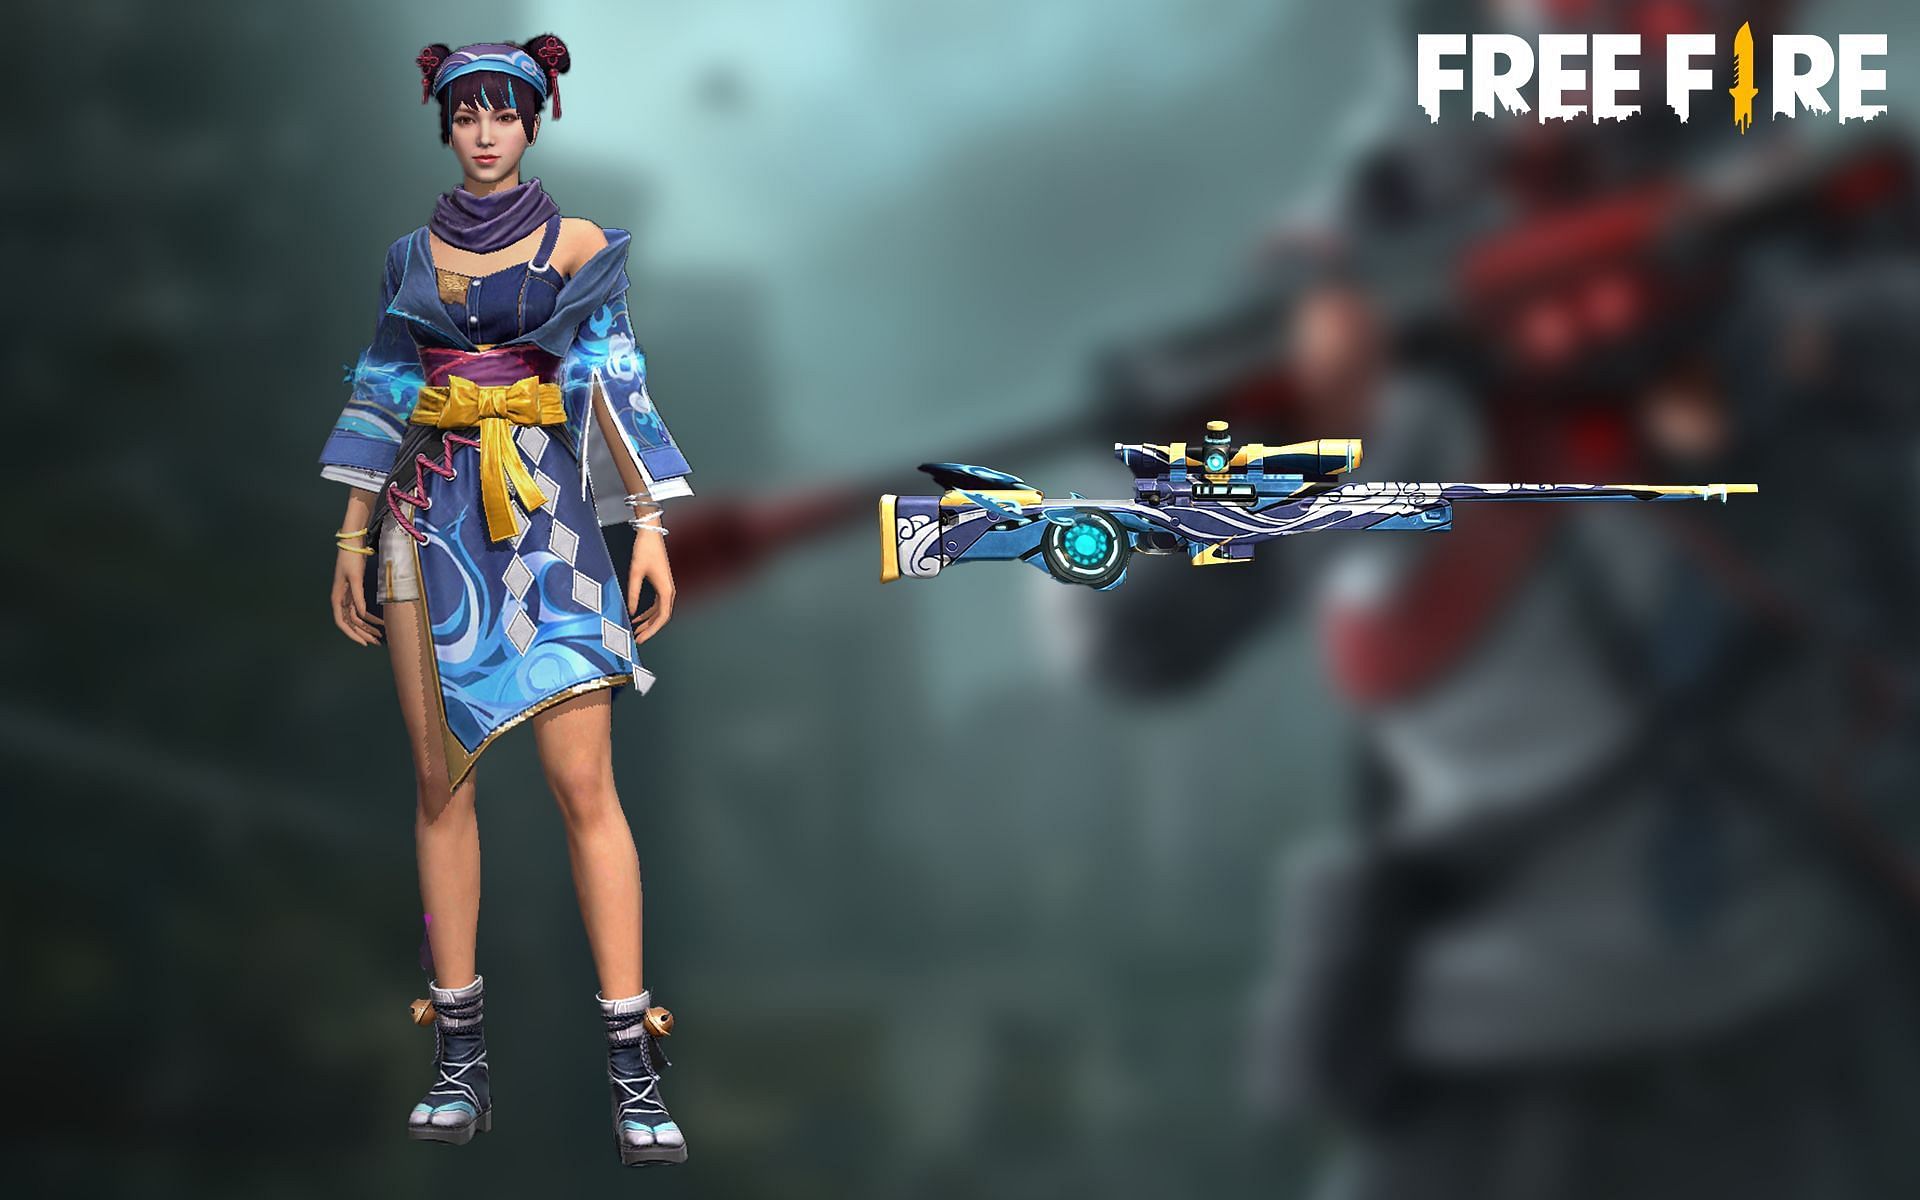 A gun skin and bundle is available for free (Image via Sportskeeda)